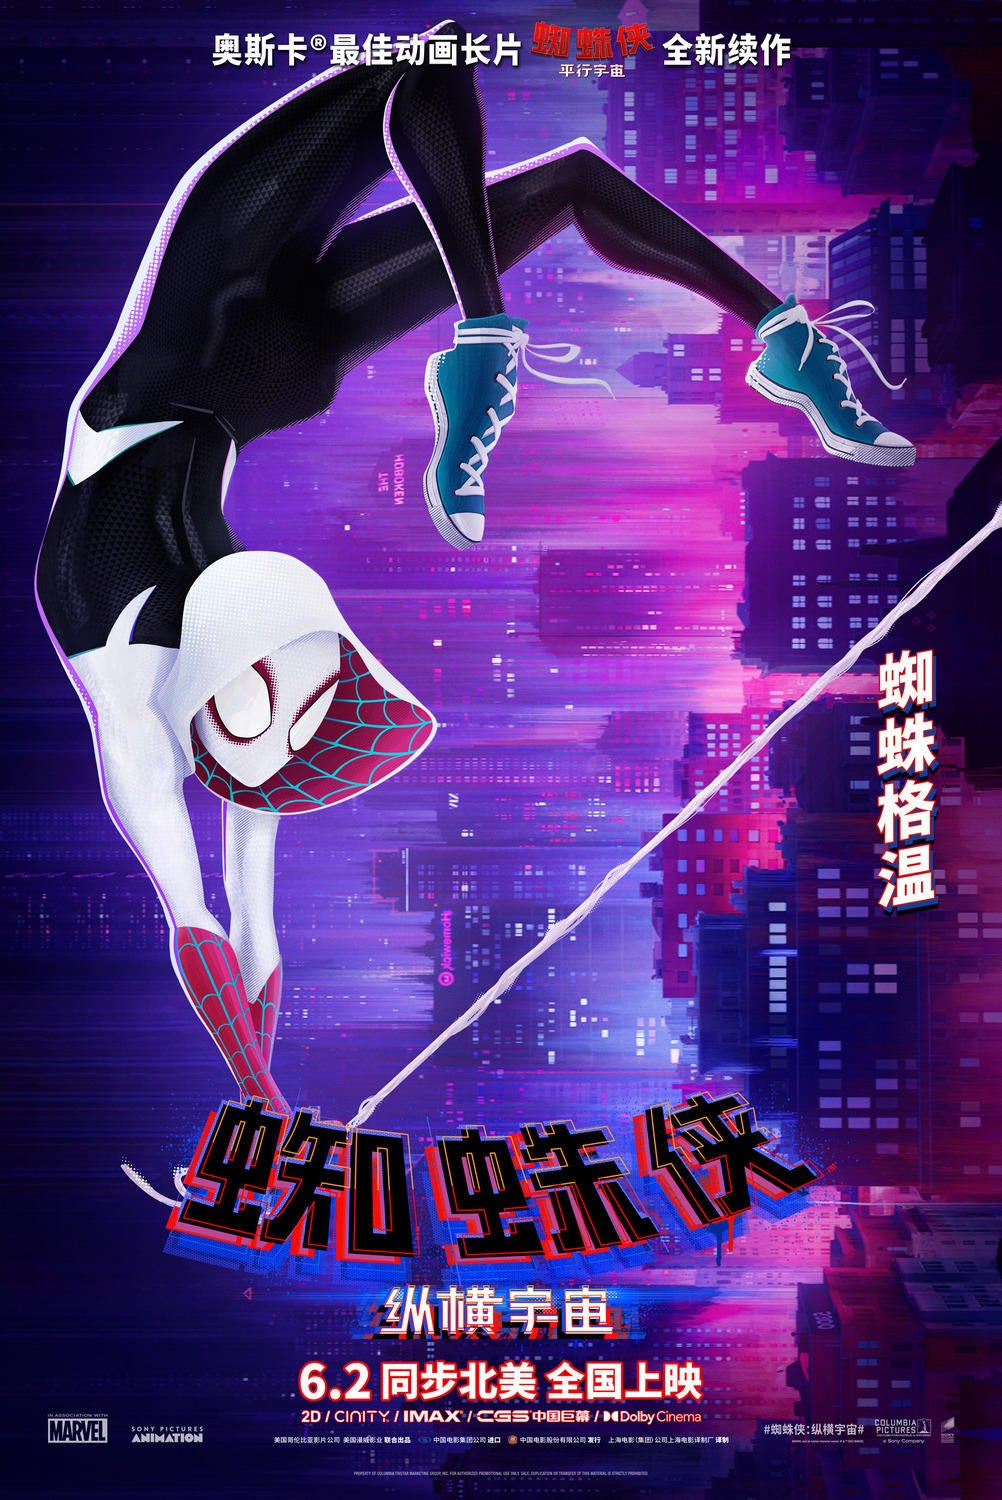 Check Out New Character Posters for 'Spider-Man: Across the Spider-Verse' -  Nerds and Beyond